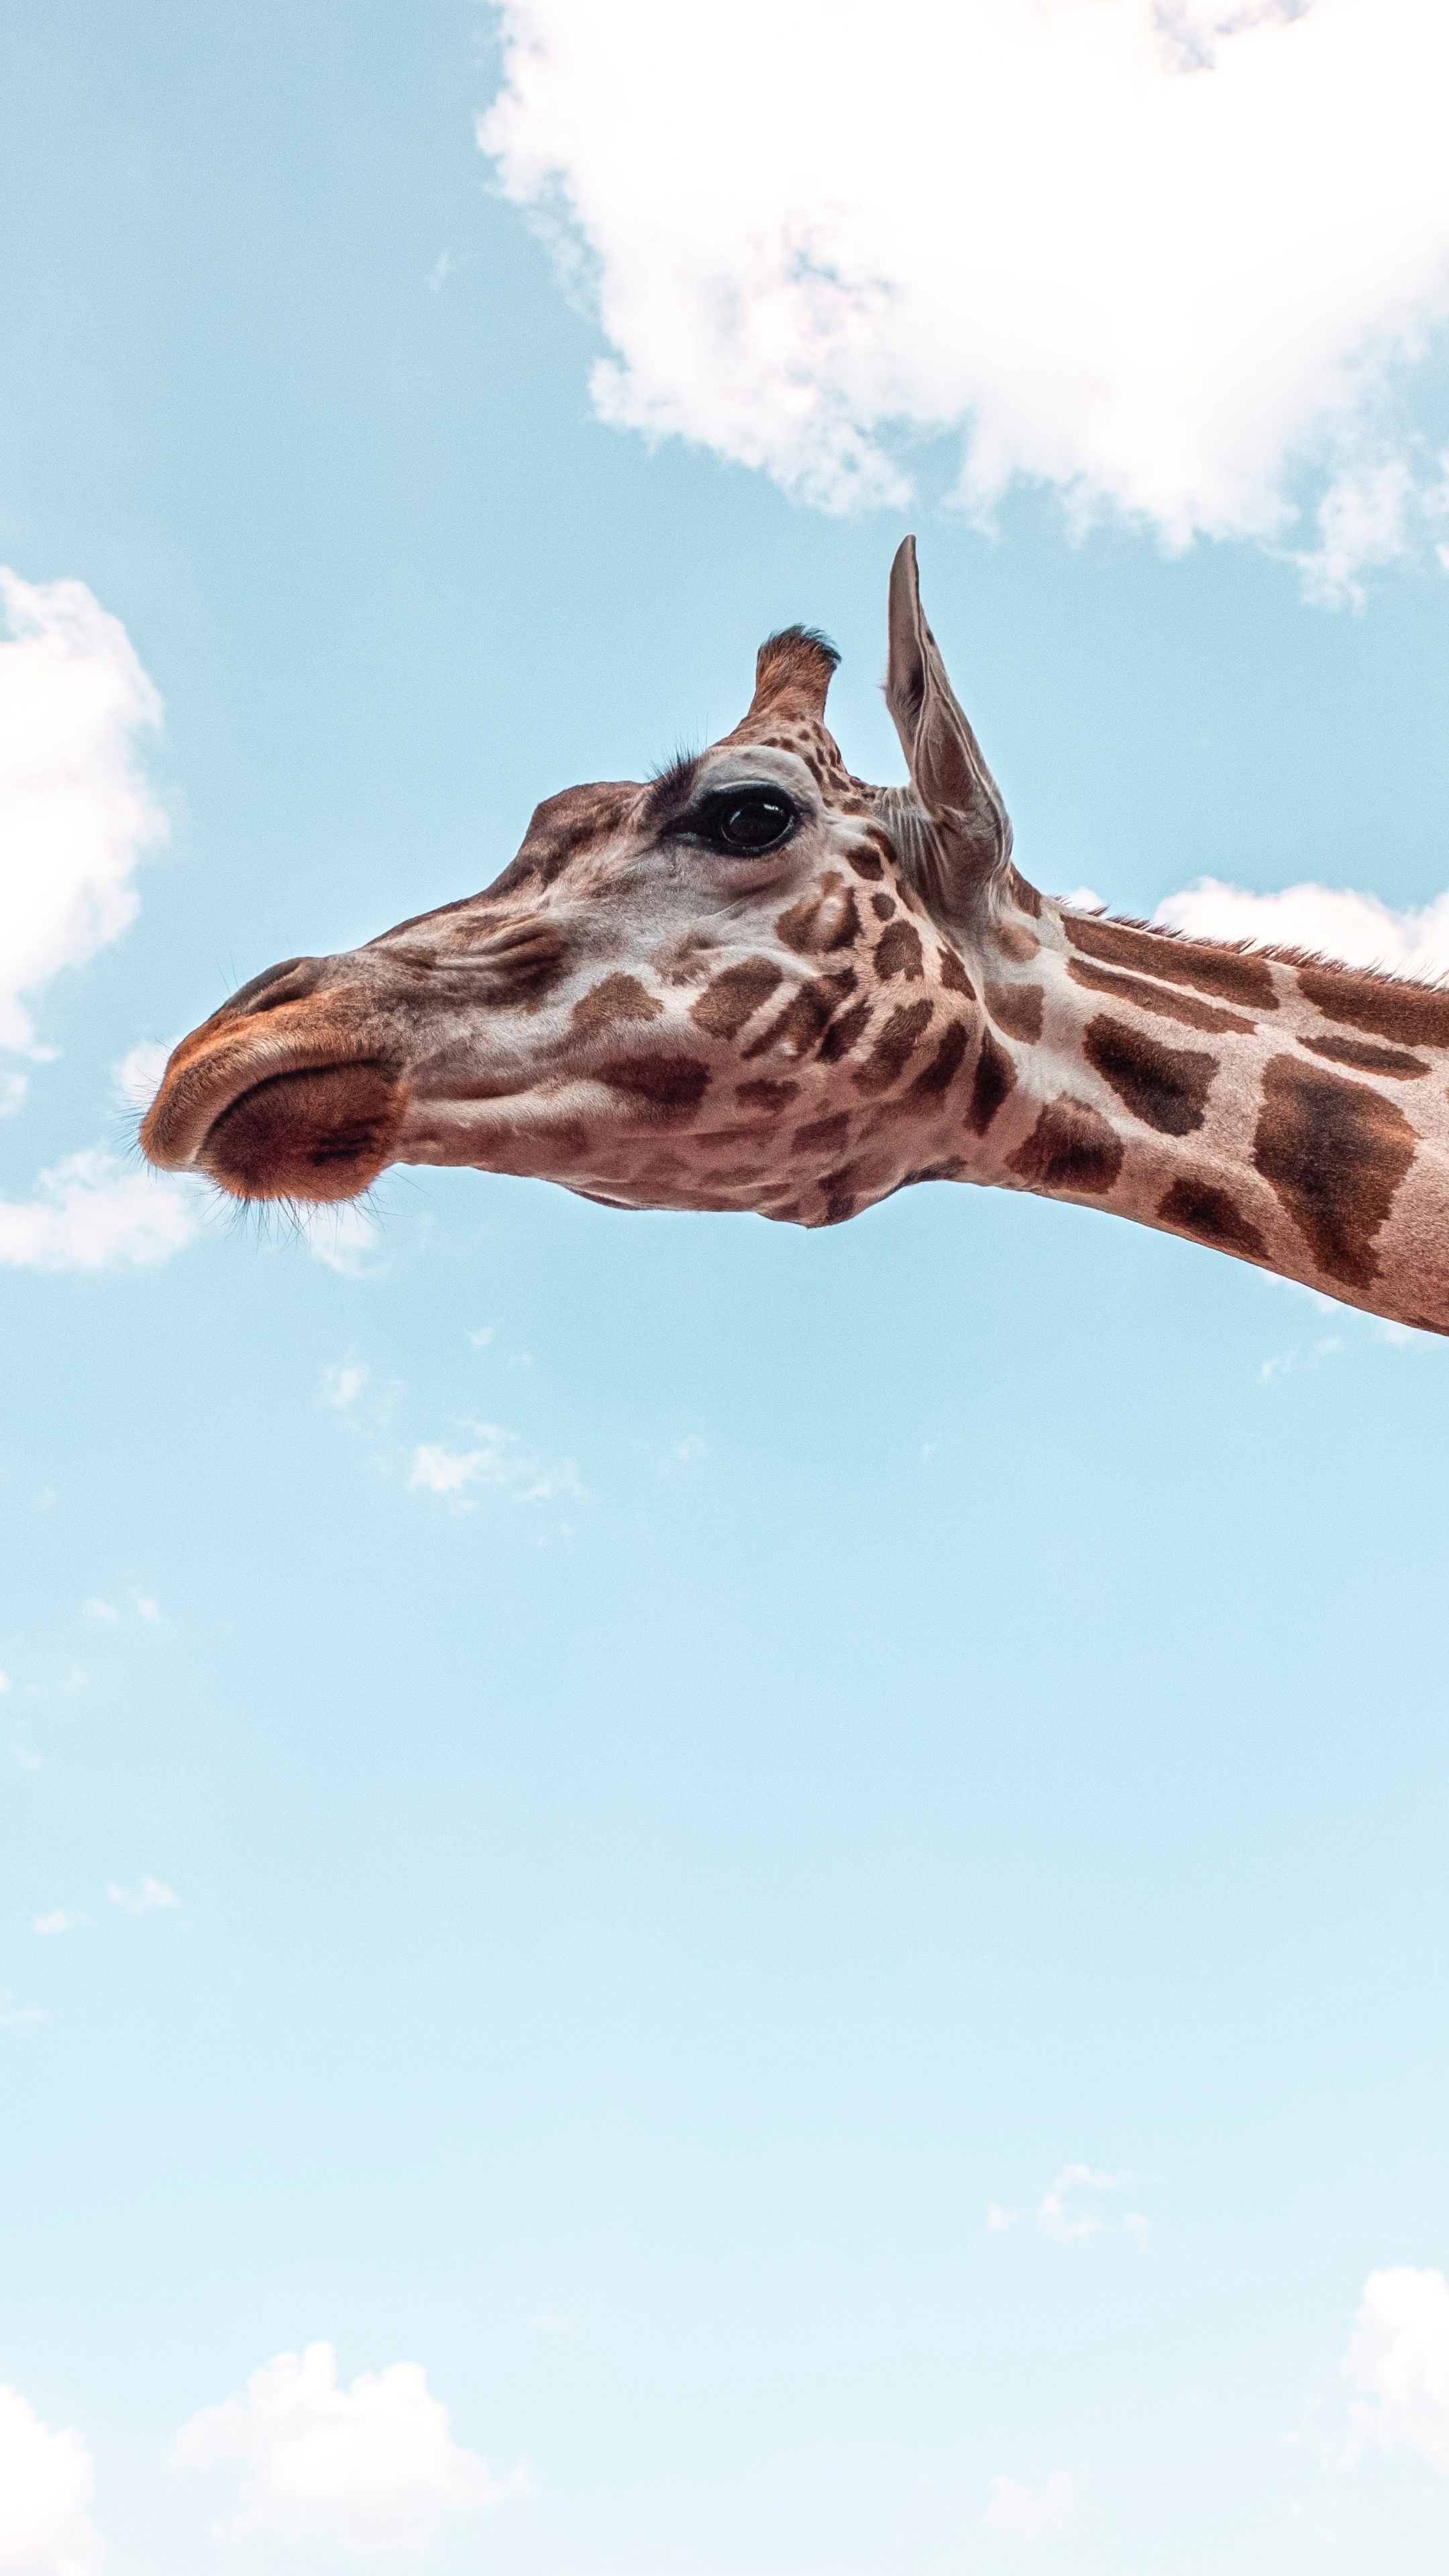 Giraffe: Uses his height to good advantage and browses on leaves and buds in treetops that few other animals can reach. 2160x3840 4K Wallpaper.